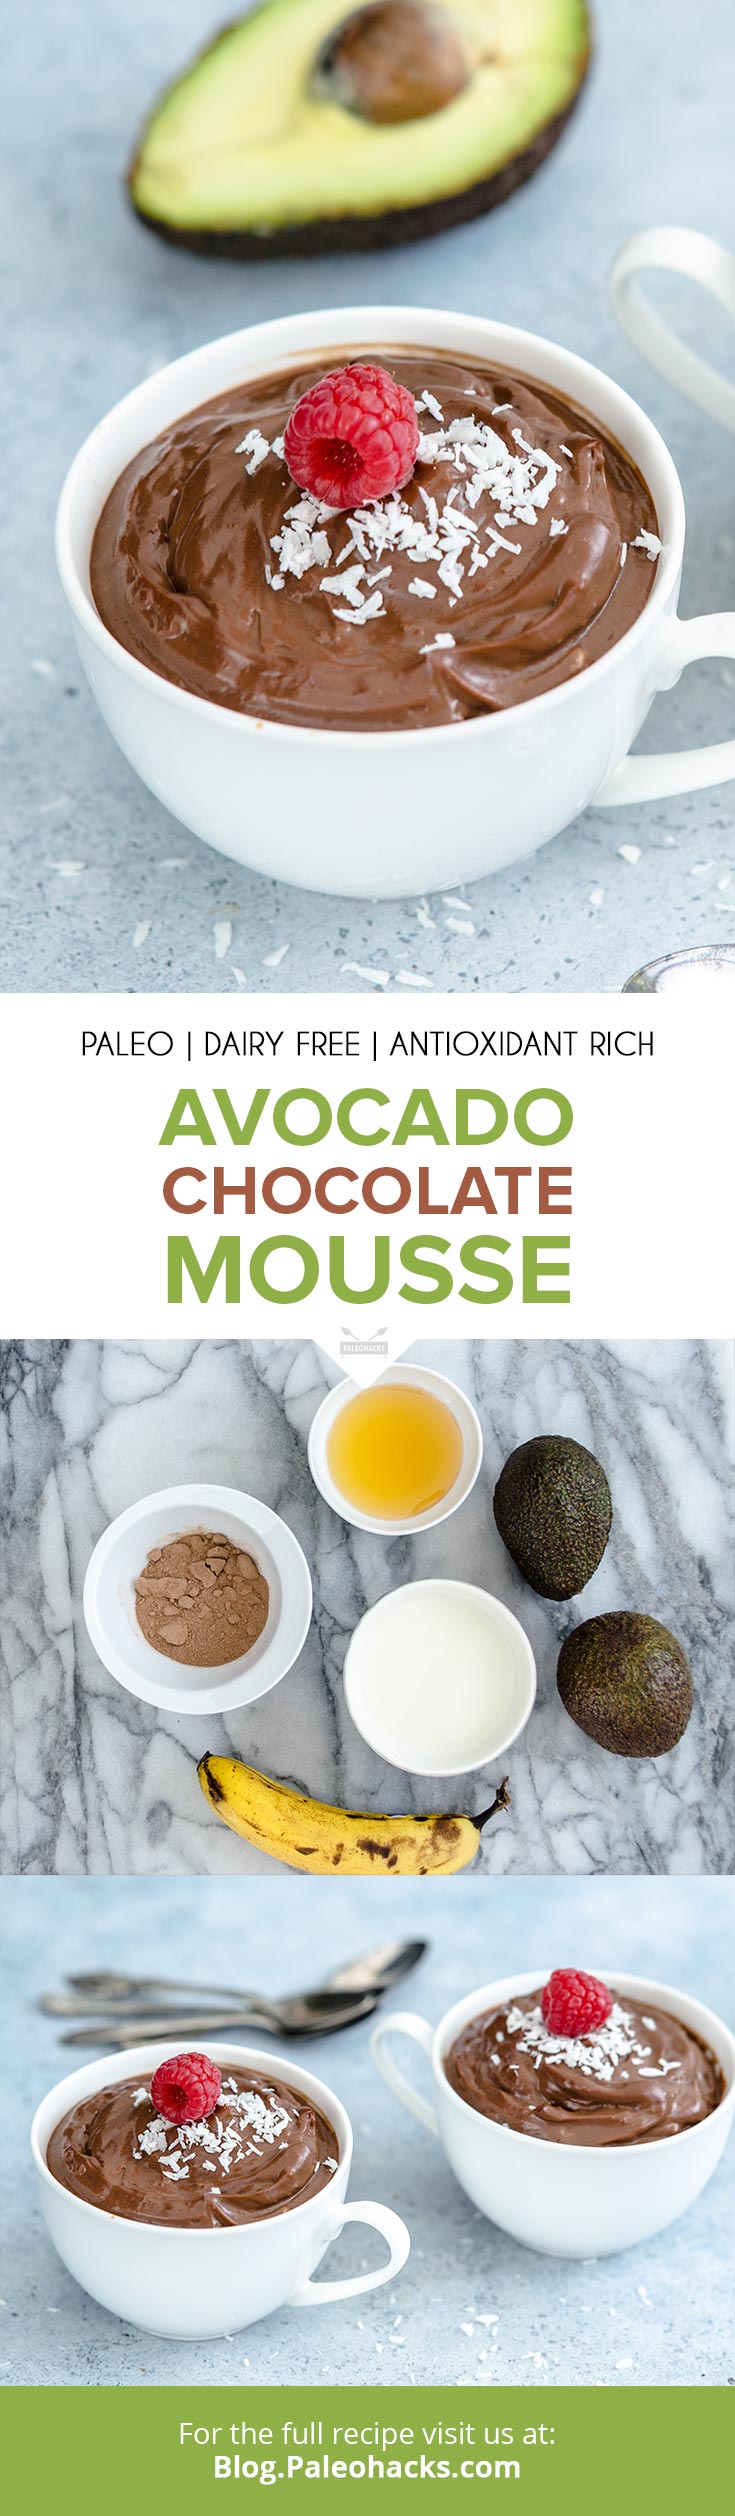 Combine chocolate and avocado together to create a decadent mousse sweetened with natural flavors. Healthy enough for breakfast and sweet enough for dessert.